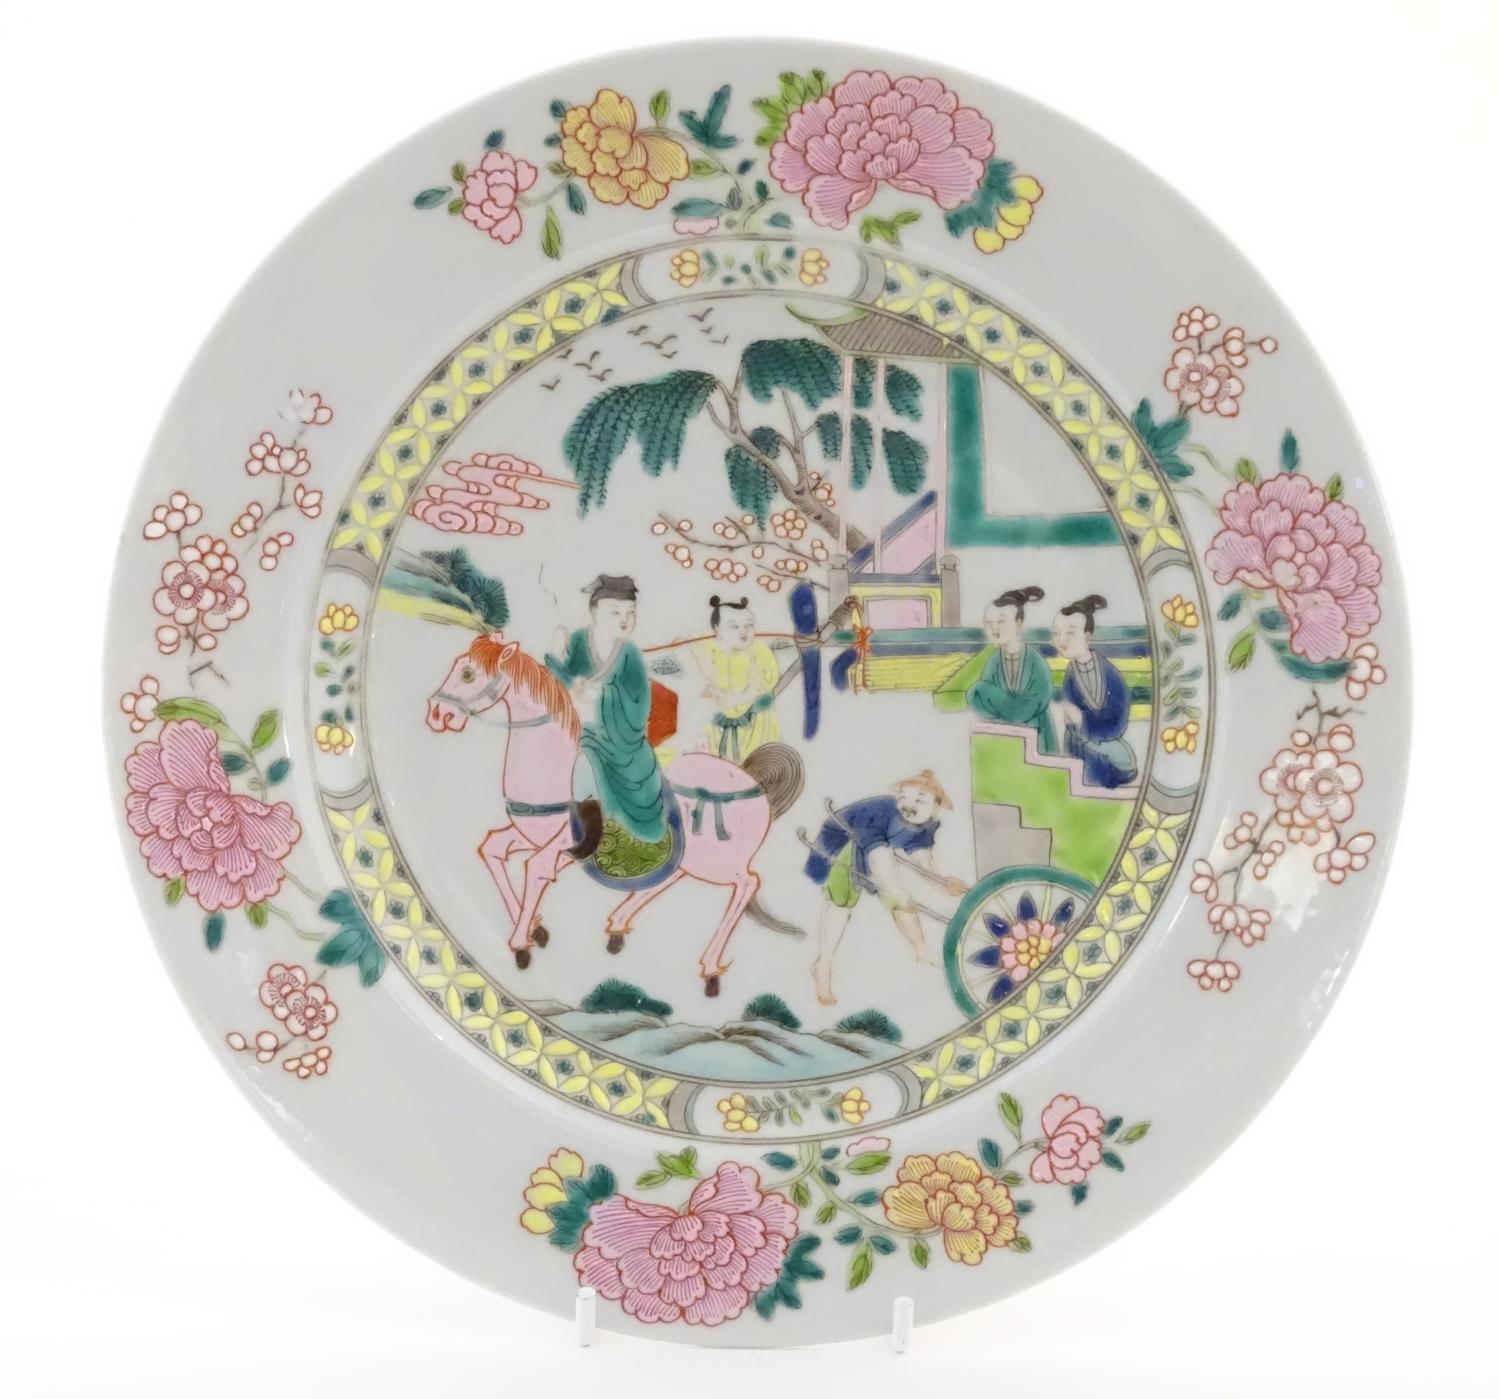 A Chinese famille rose plate depicting a landscape scene with a figure on horse back with an